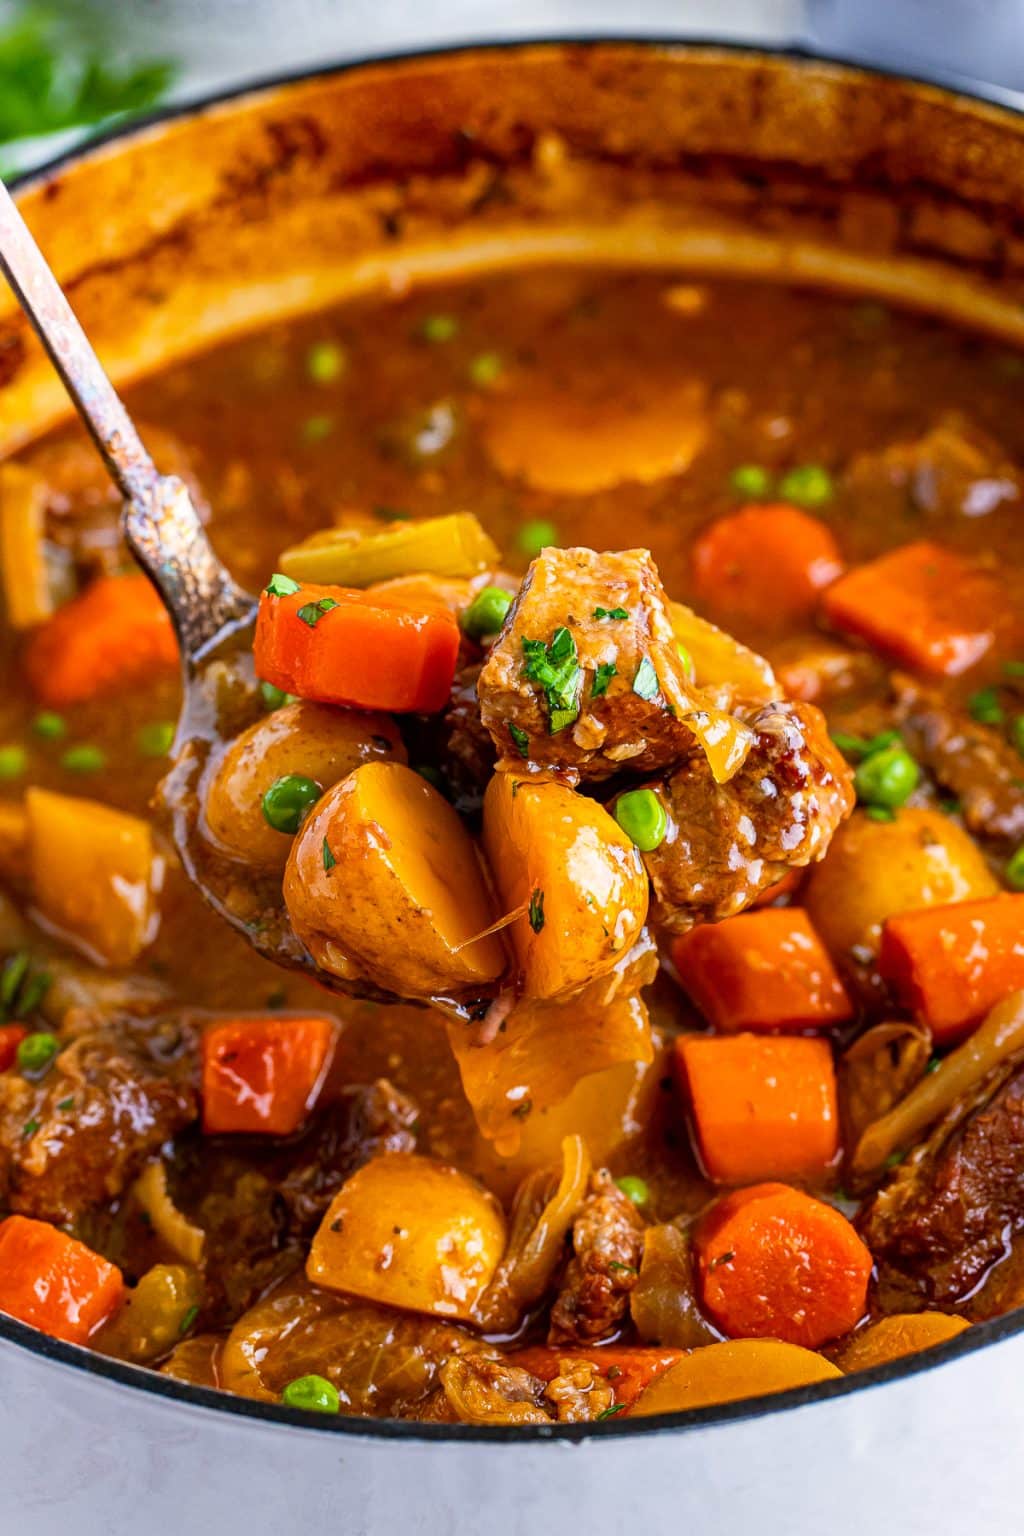 Easy Beef Stew Recipe with Red Wine in Oven